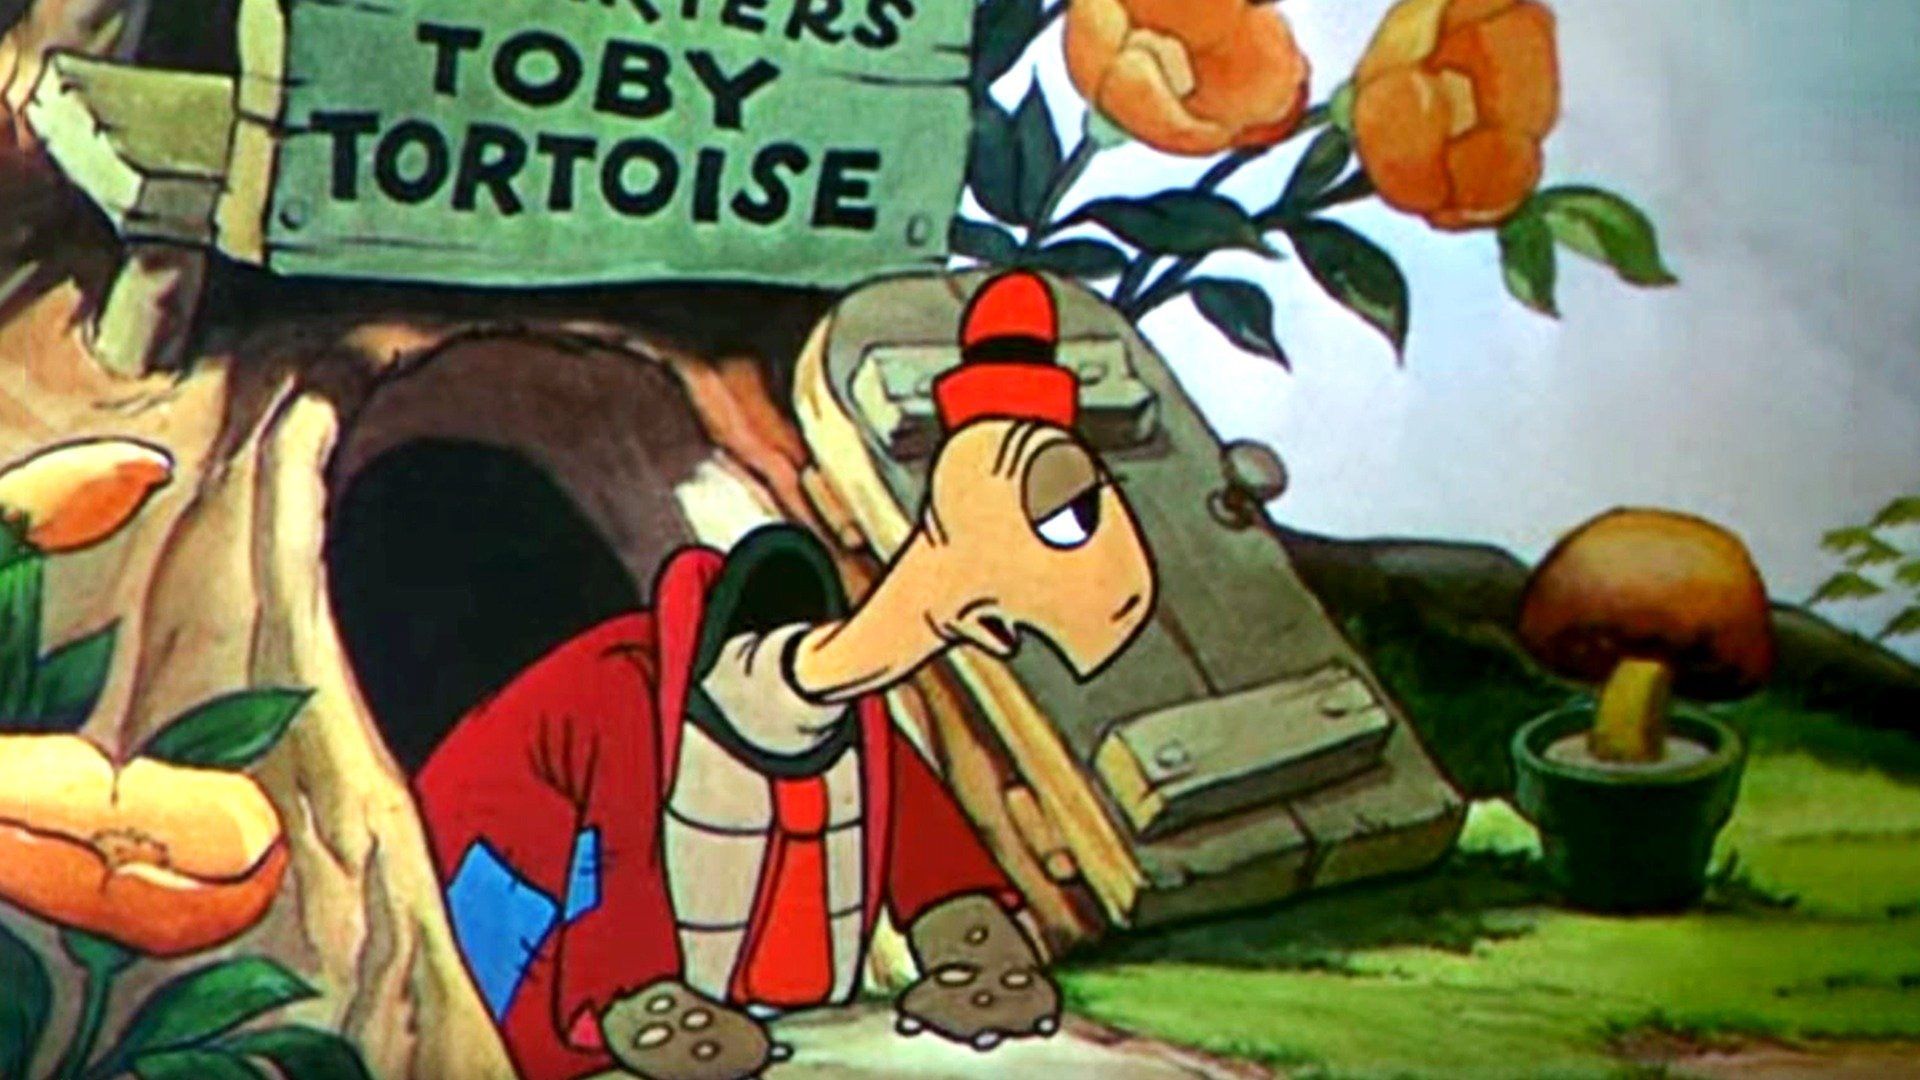 The Tortoise and the Hare Backdrop